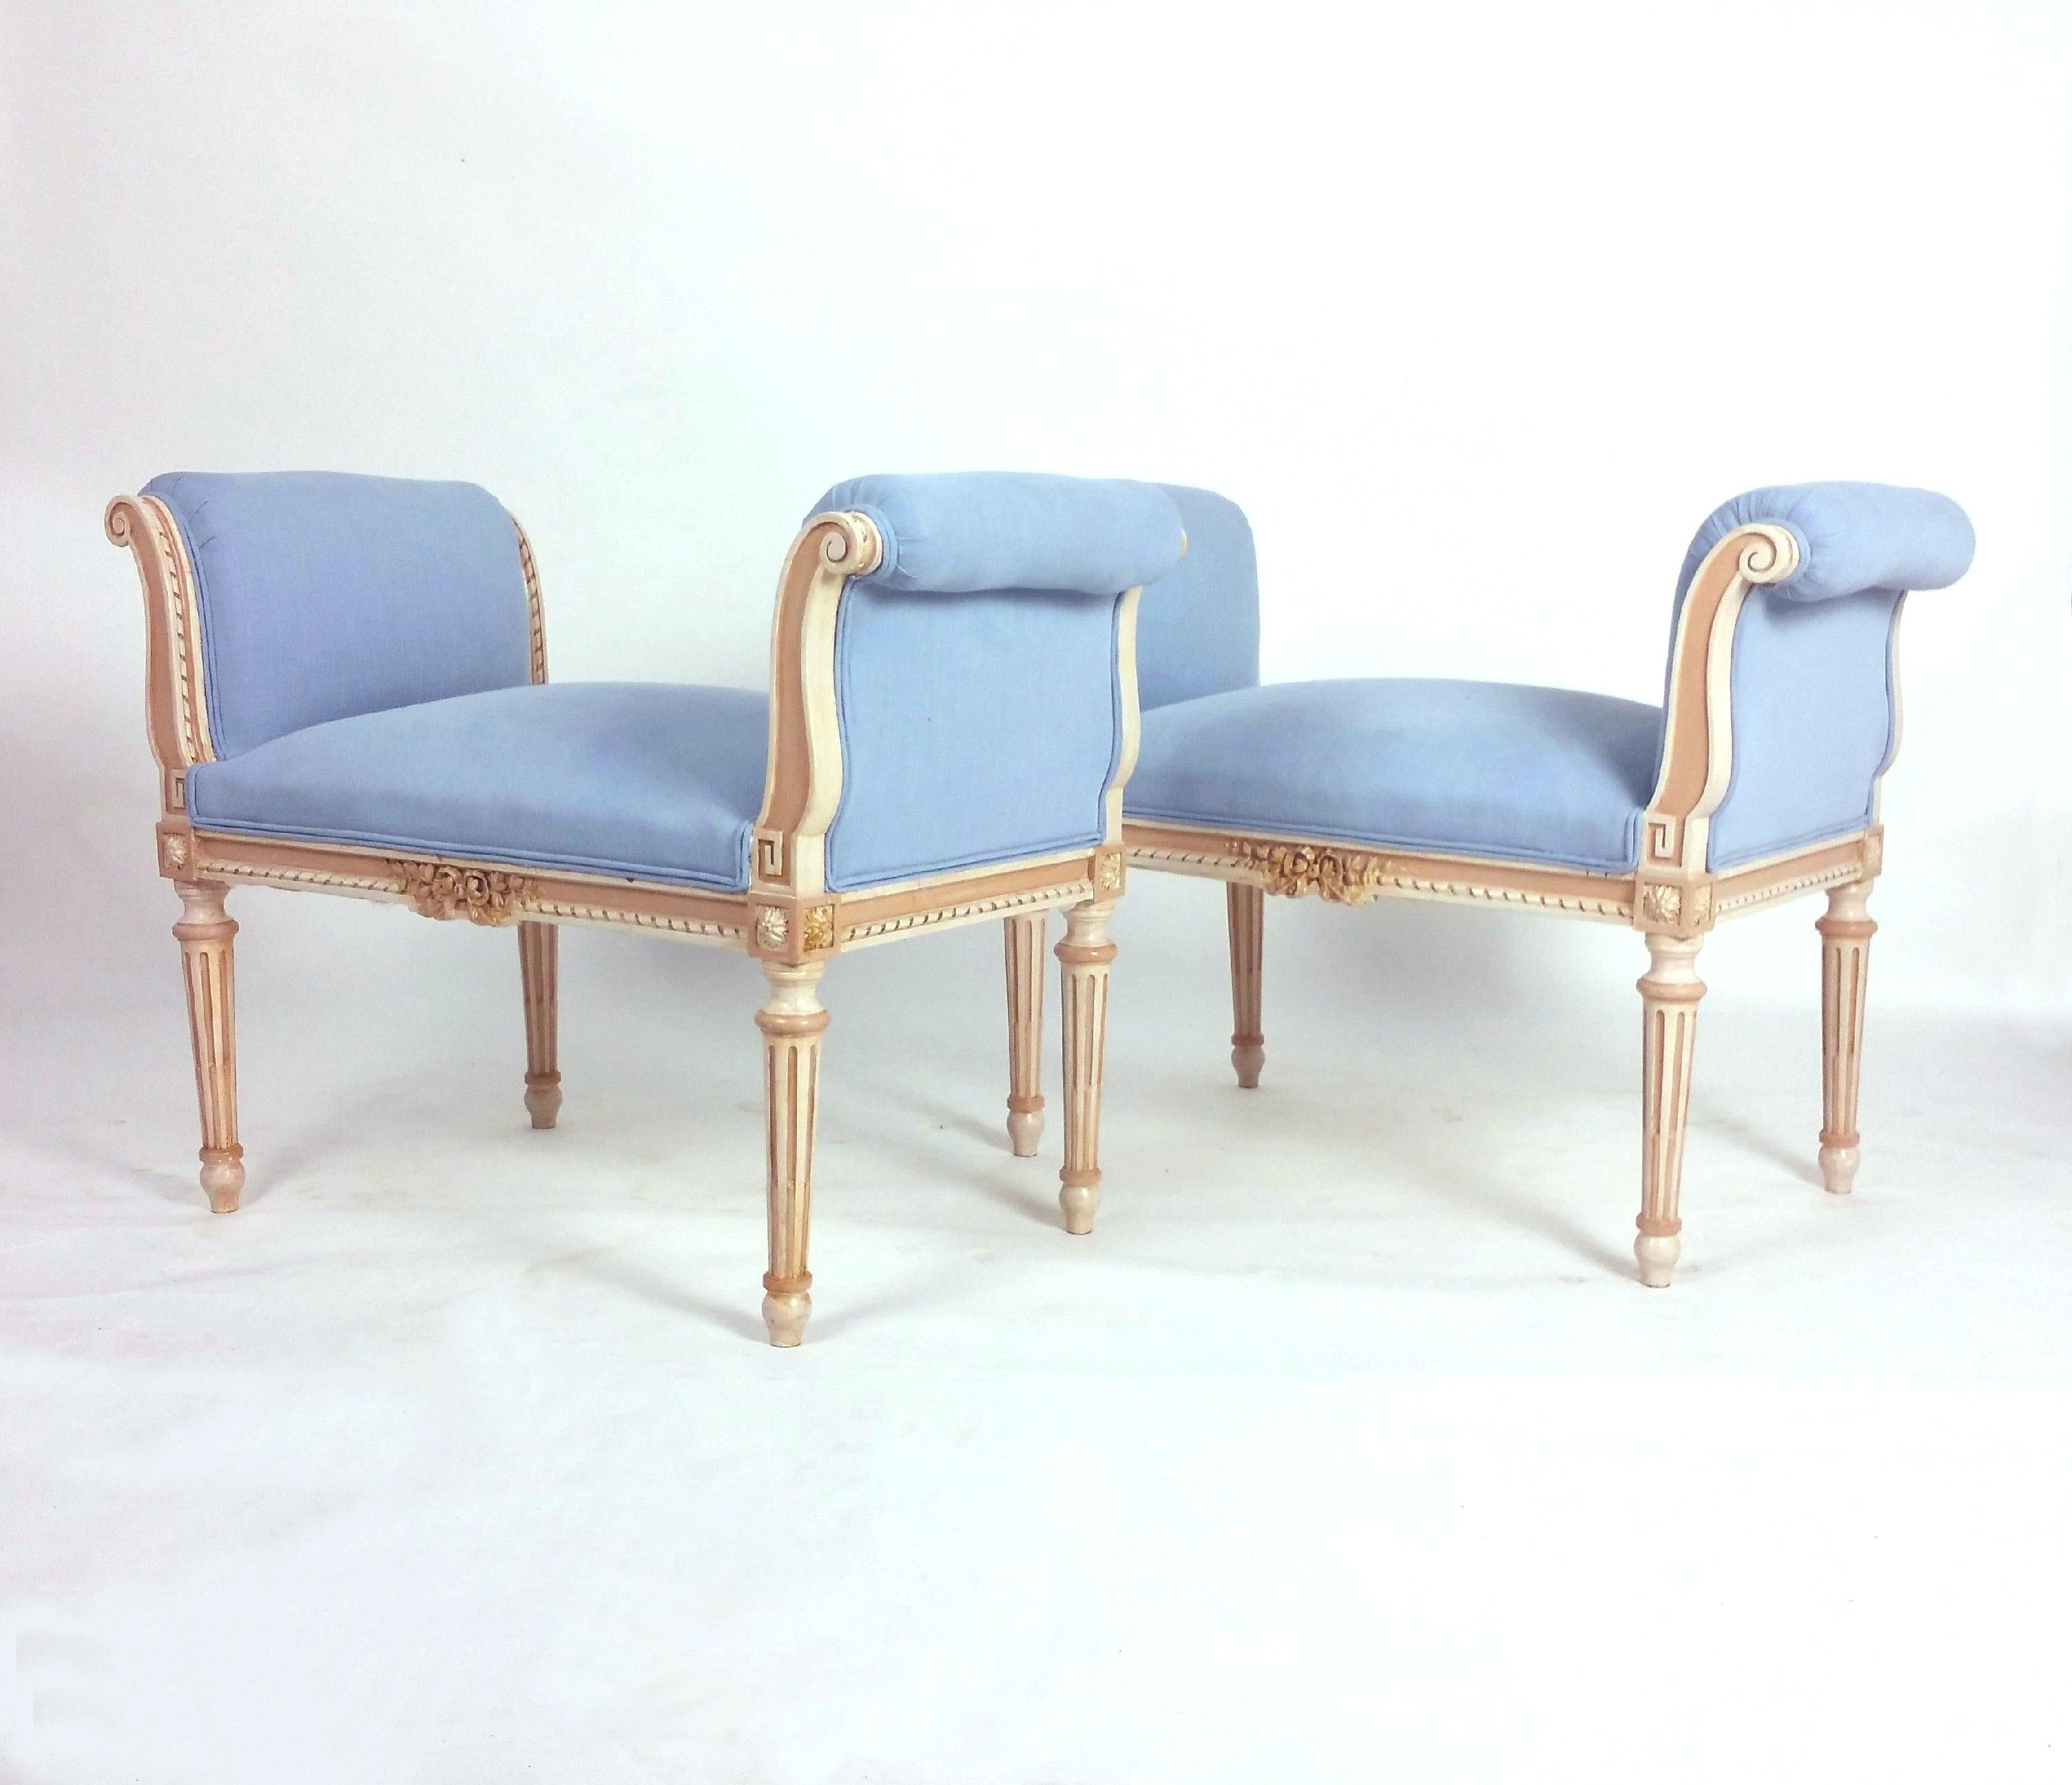 This splendid pair of late 19th century, French carved and painted window seats feature a very gracefully shaped design on fluted supports and upholstered in a soft baby blue linen blend with double piping trim. Each seat measures 35 in–89 cm wide,